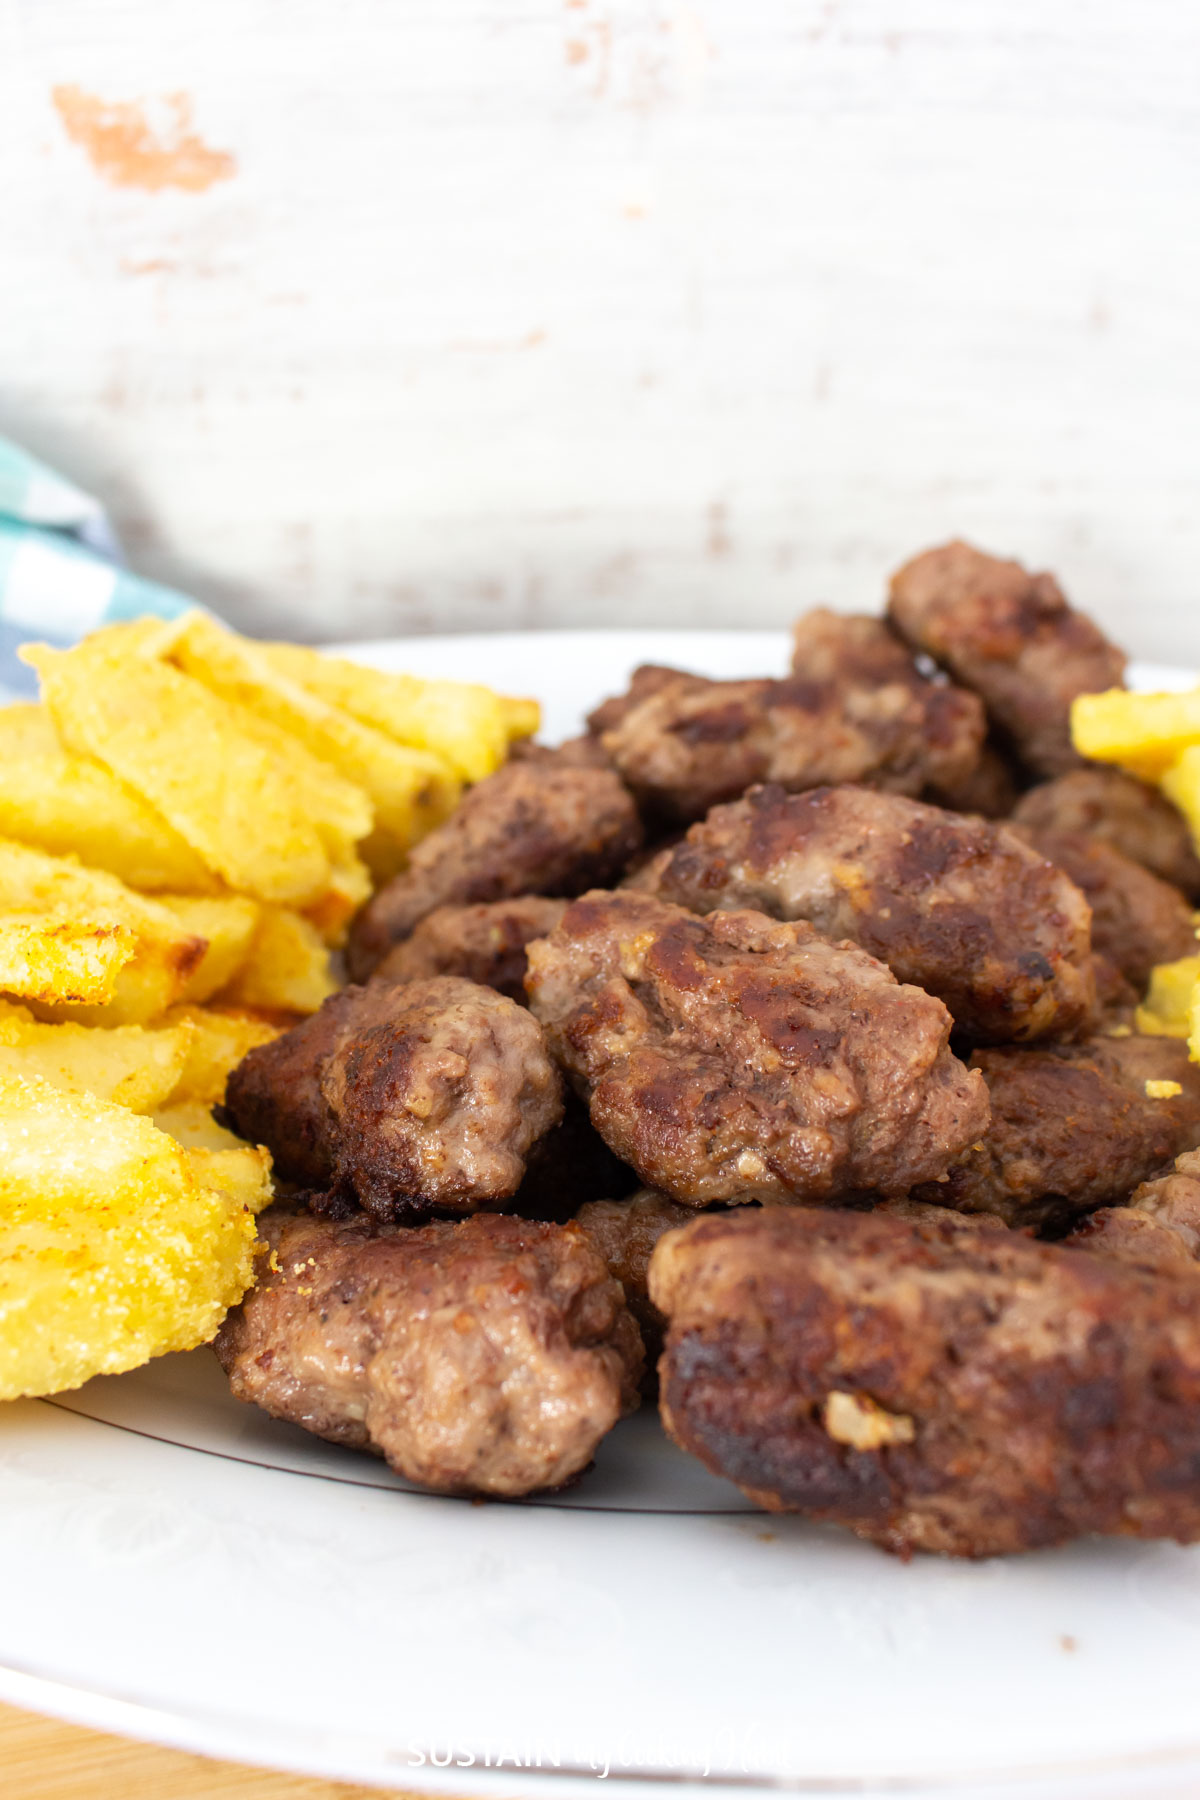 Croatian cevapi mini sausages stacked on a plate.